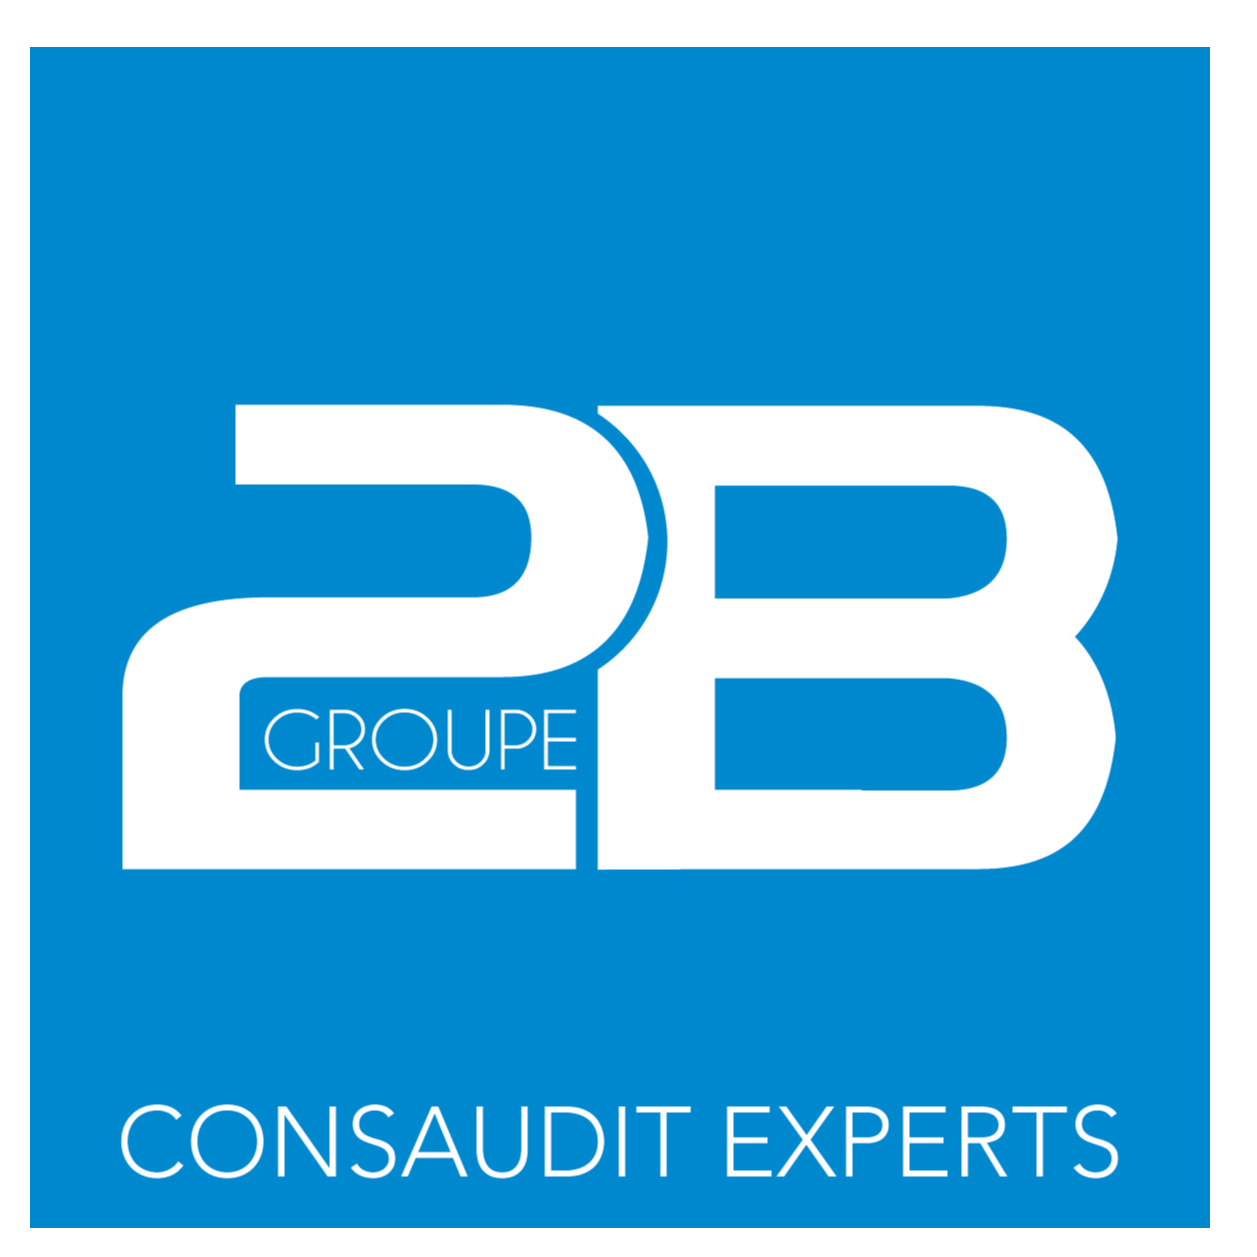 CONS@UDIT EXPERTS SOCIETE D'EXPERTISE COMPTABLE – Expert-comptable logo